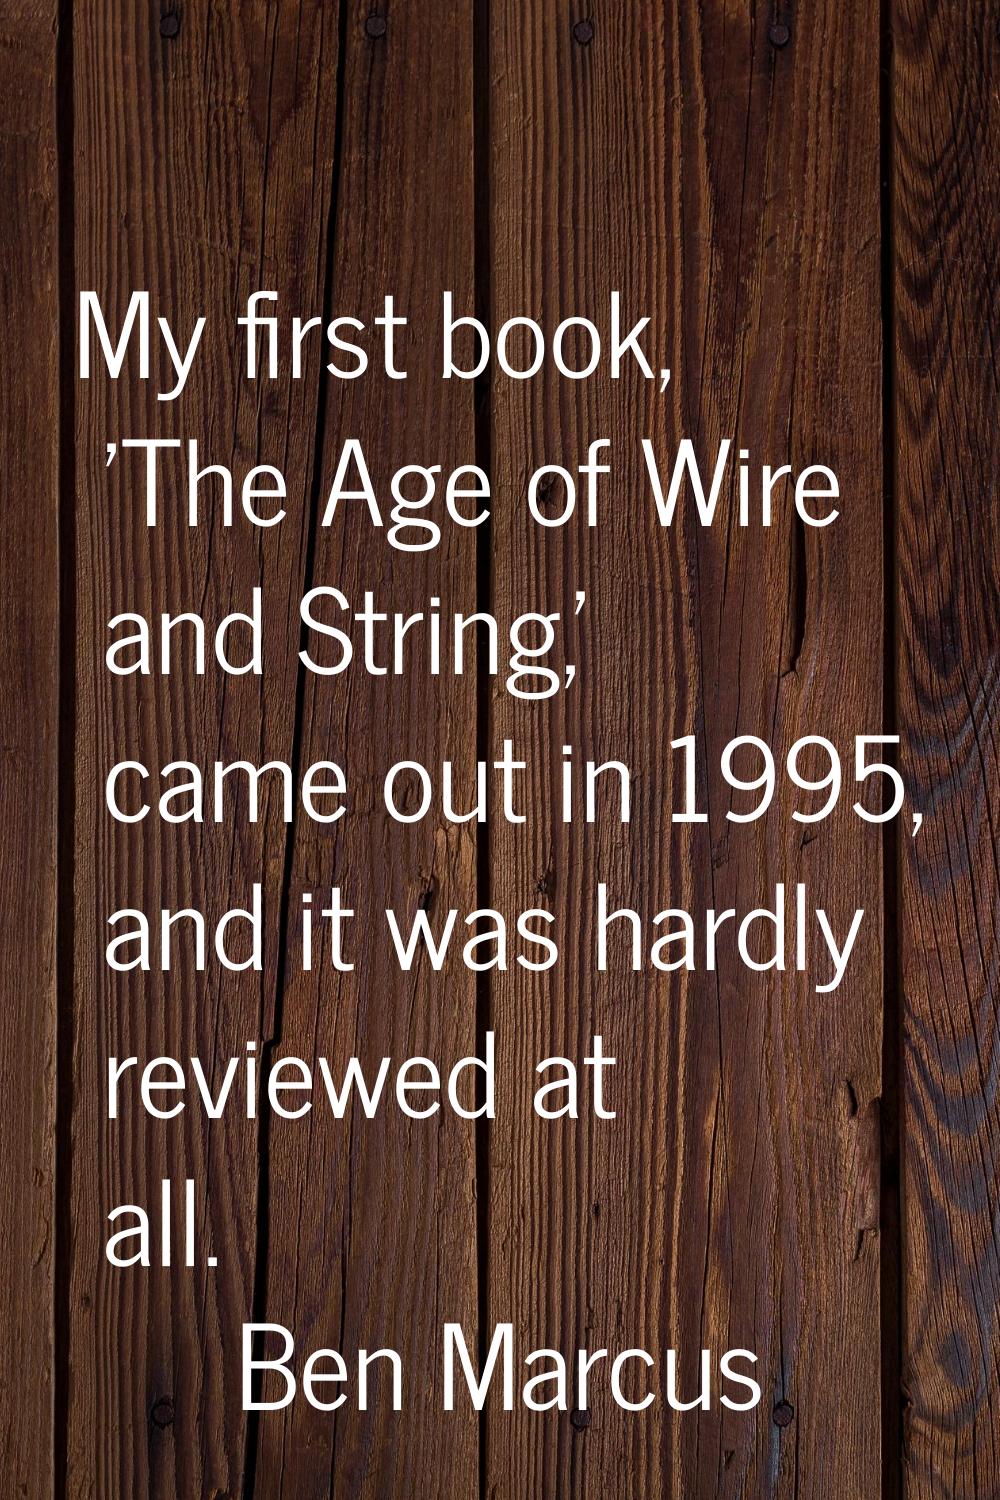 My first book, 'The Age of Wire and String,' came out in 1995, and it was hardly reviewed at all.